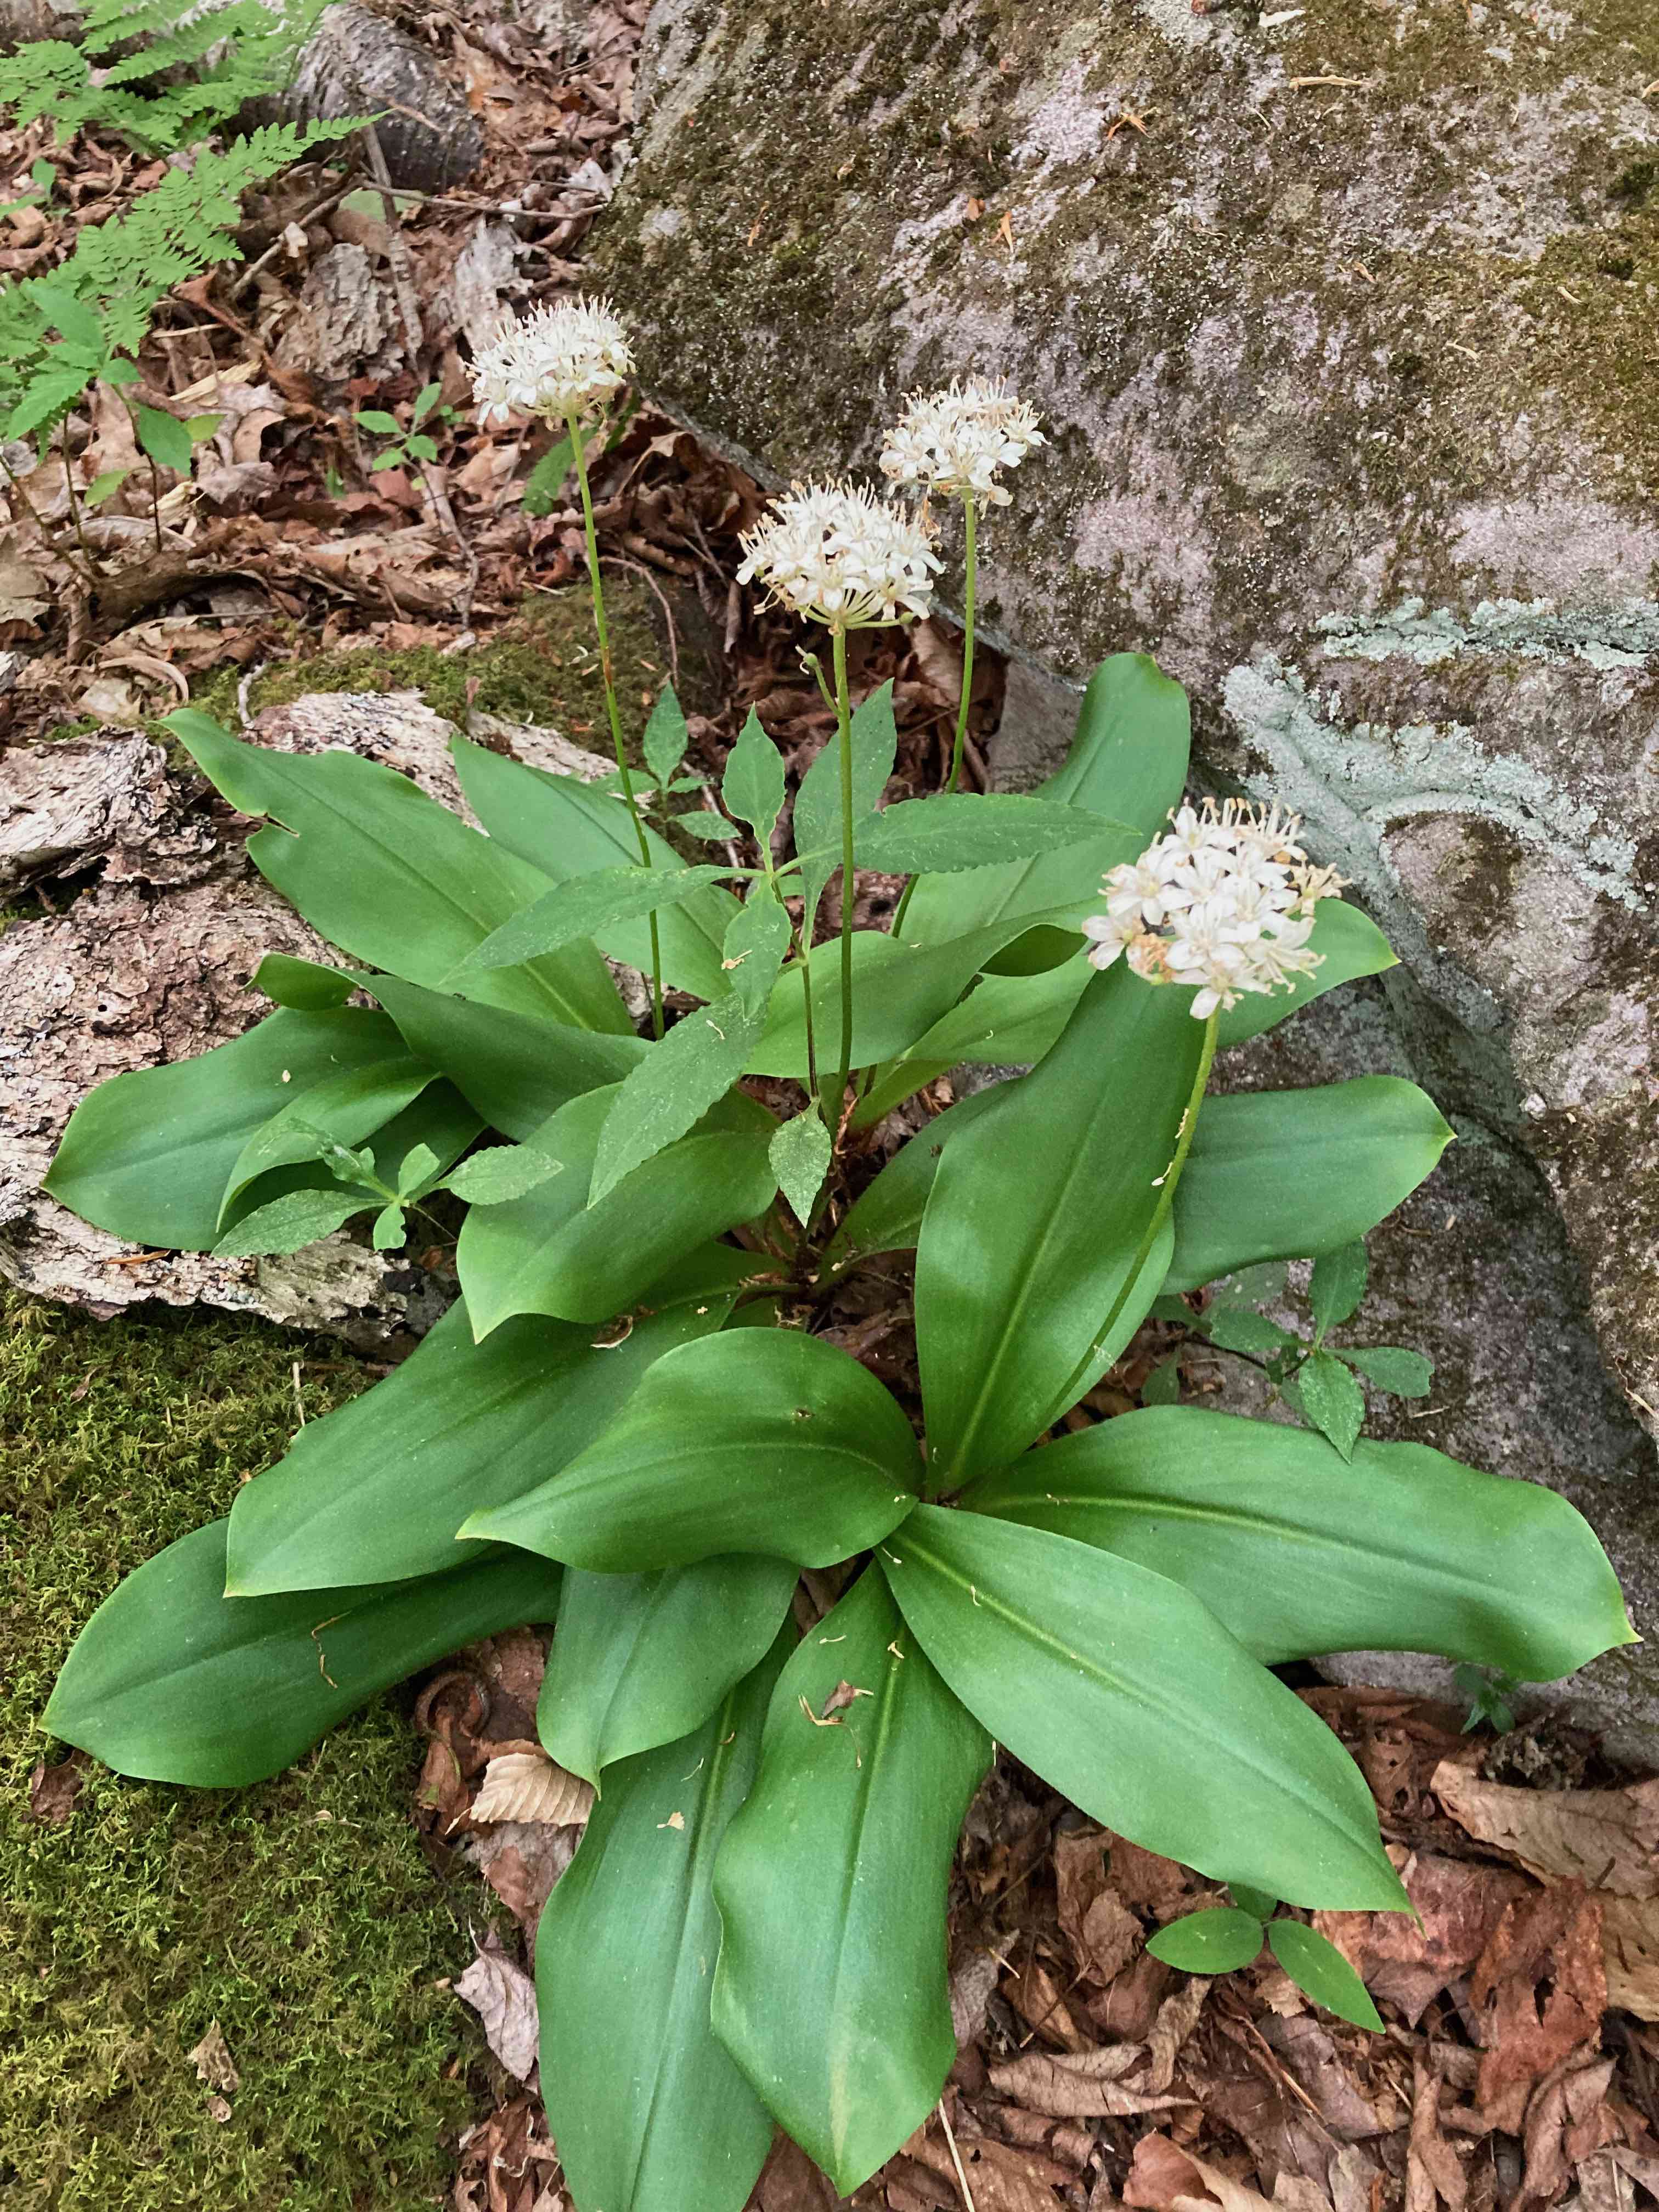 The Scientific Name is Clintonia umbellulata. You will likely hear them called Speckled Wood Lily. This picture shows the A lovely patch of Clintonia umbellulata